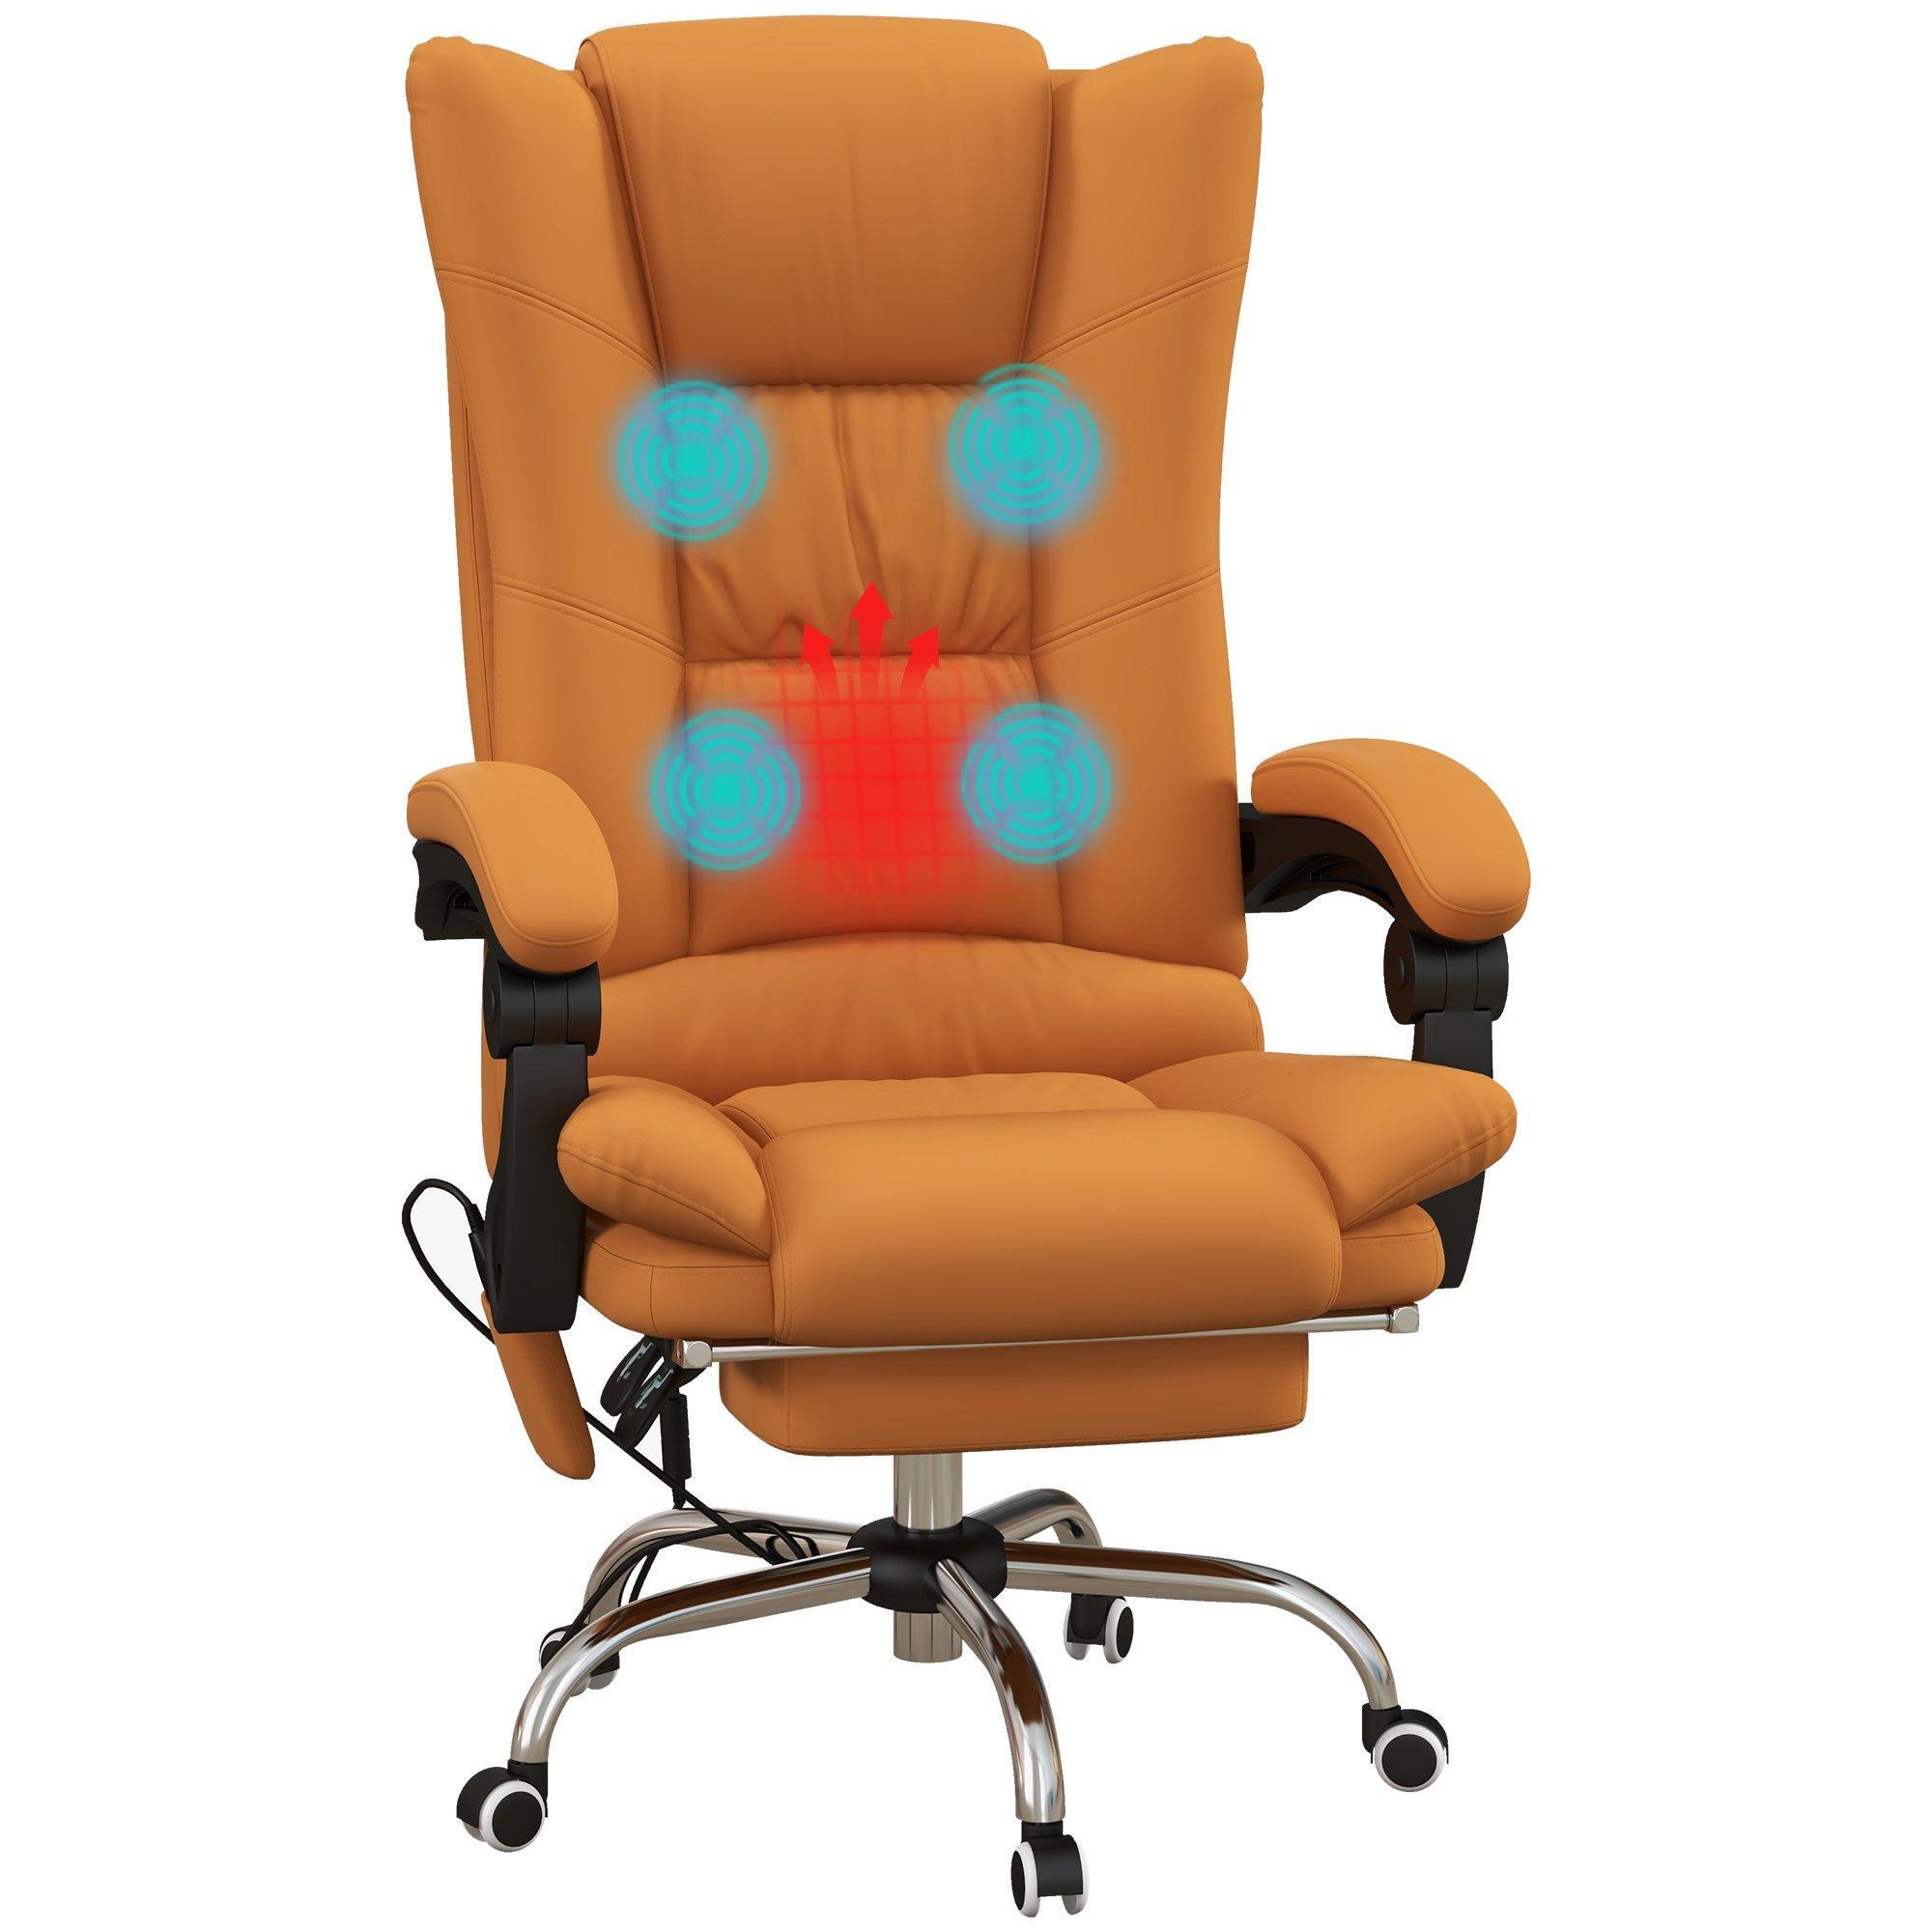 Executive Office Chair with Vibration Massage - image 1